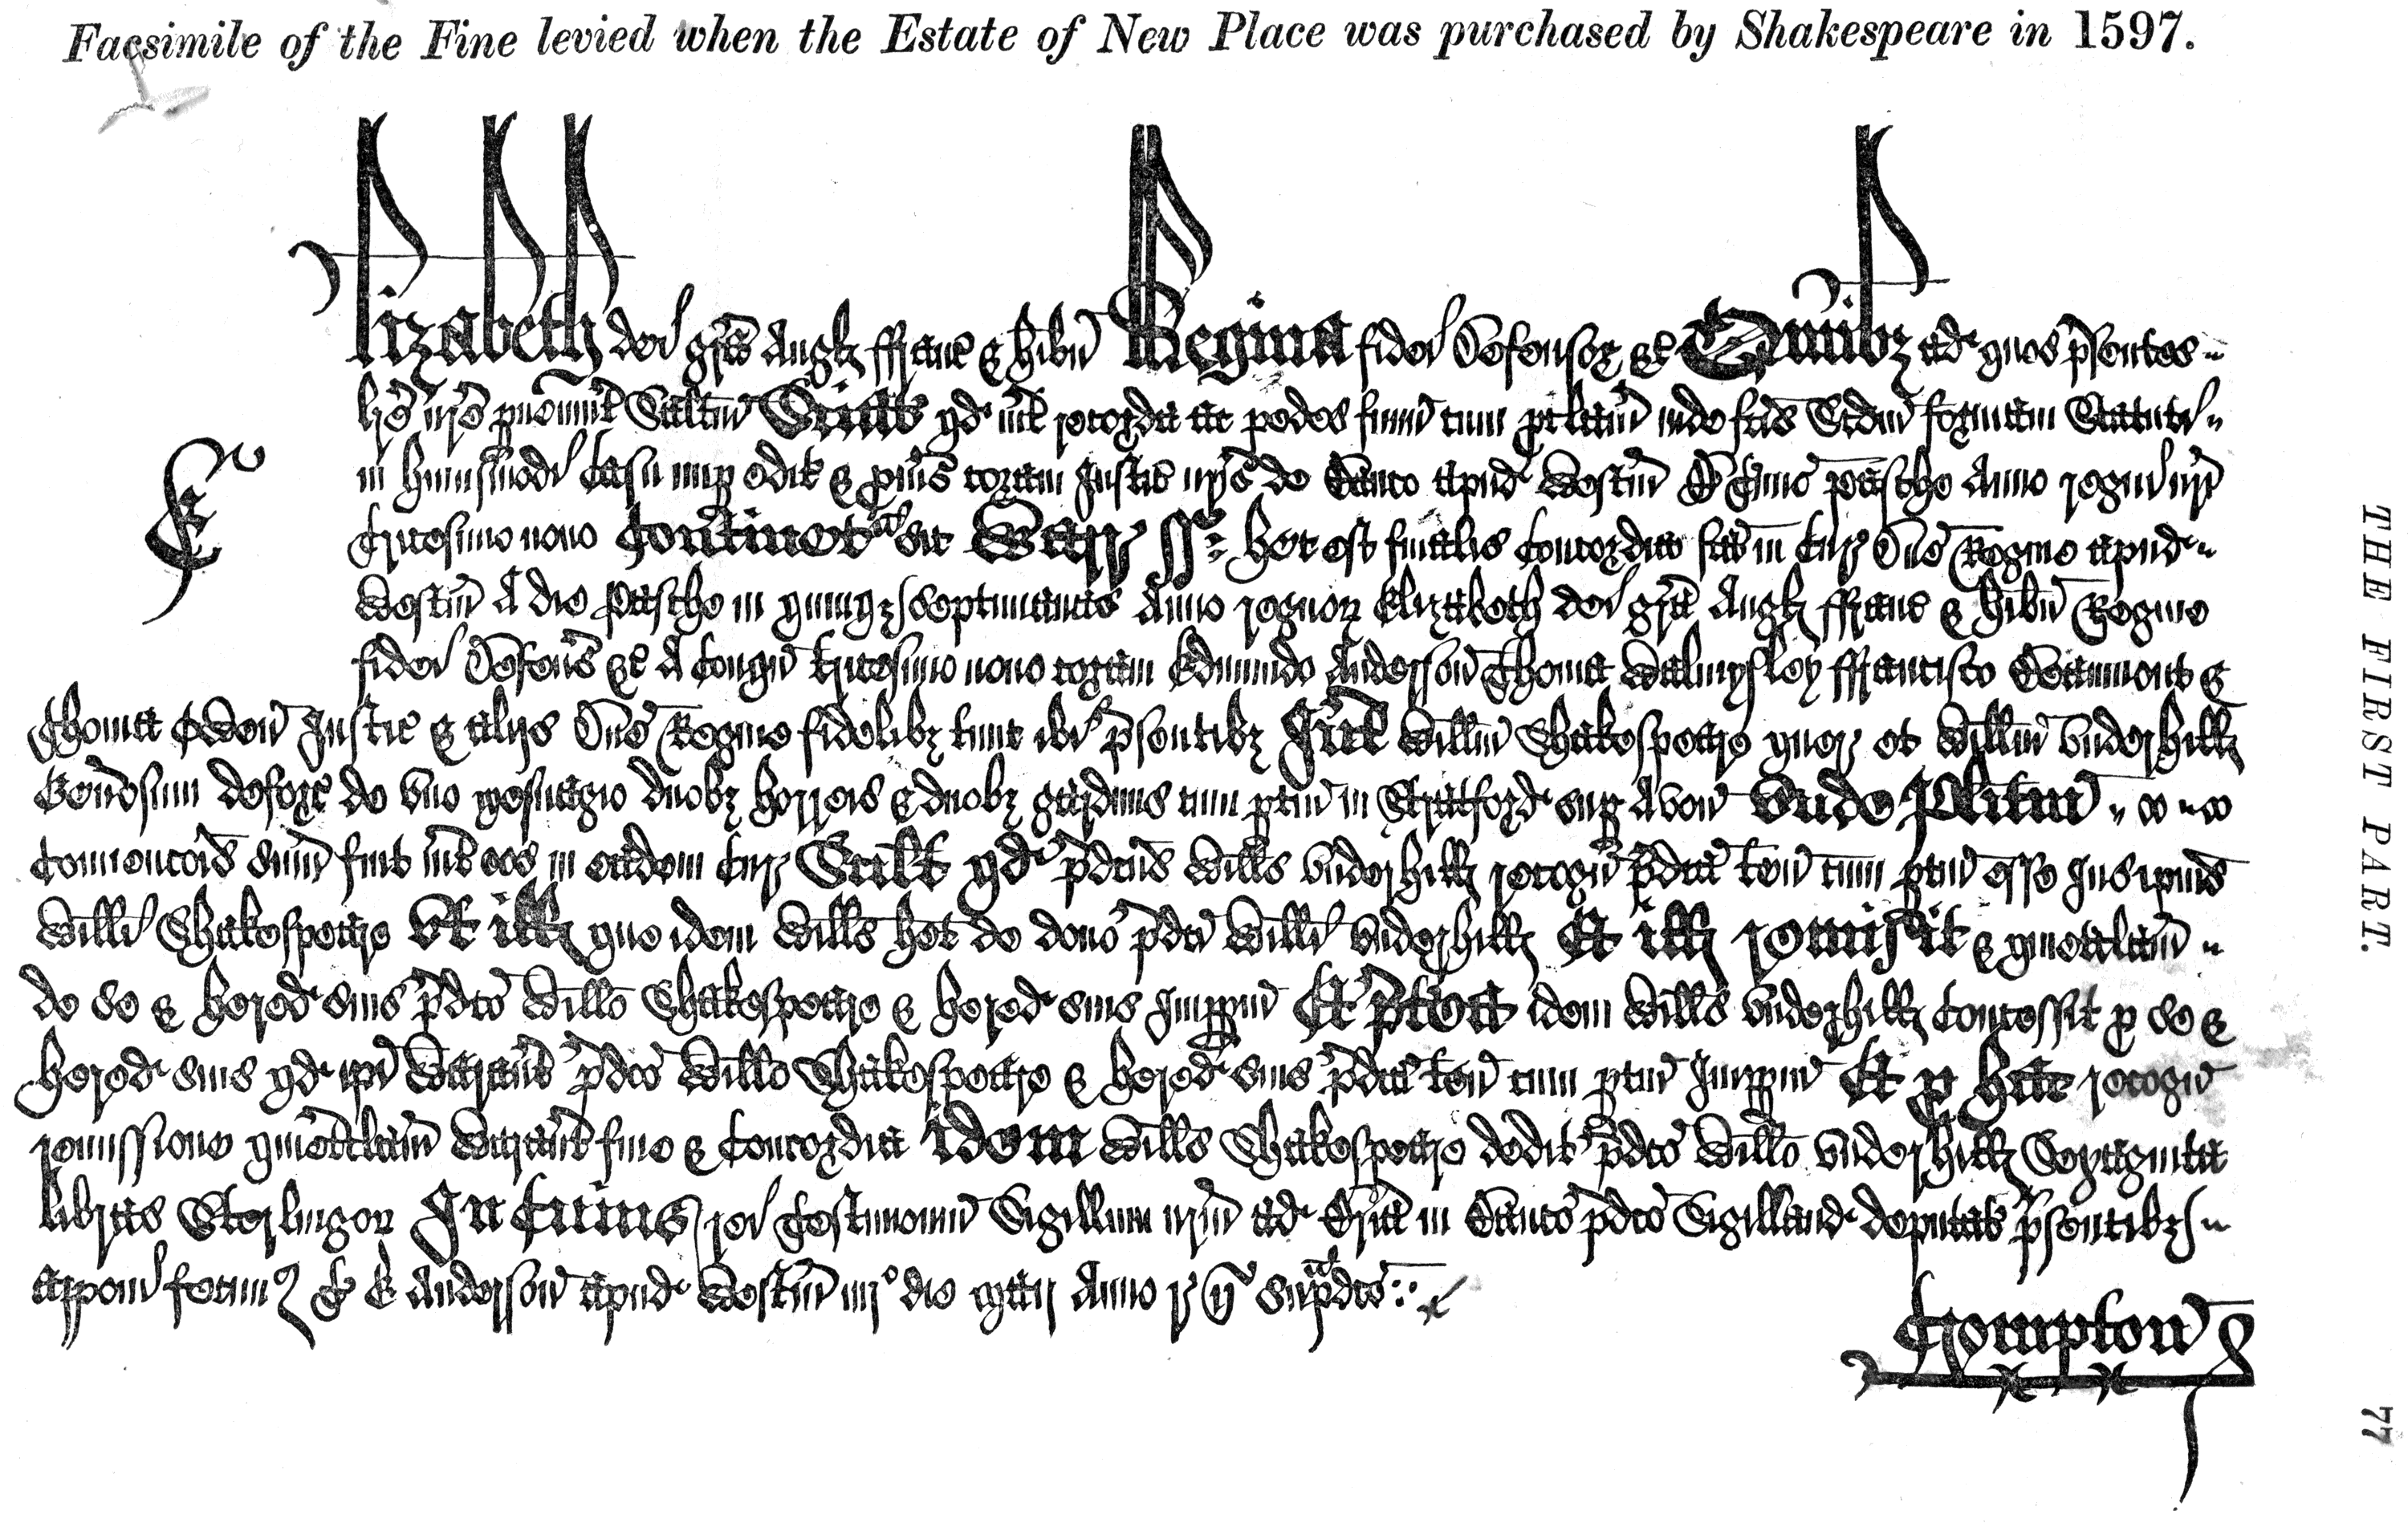 Facsimile of fine levied when New Place, Stratford on Avon, was purchased by Shakespeare in 1597. From James Halliwell 'Illustrations of the life of Shakespeare' (1874), page 77, published size 23.5cm wide by 14.7cm high.